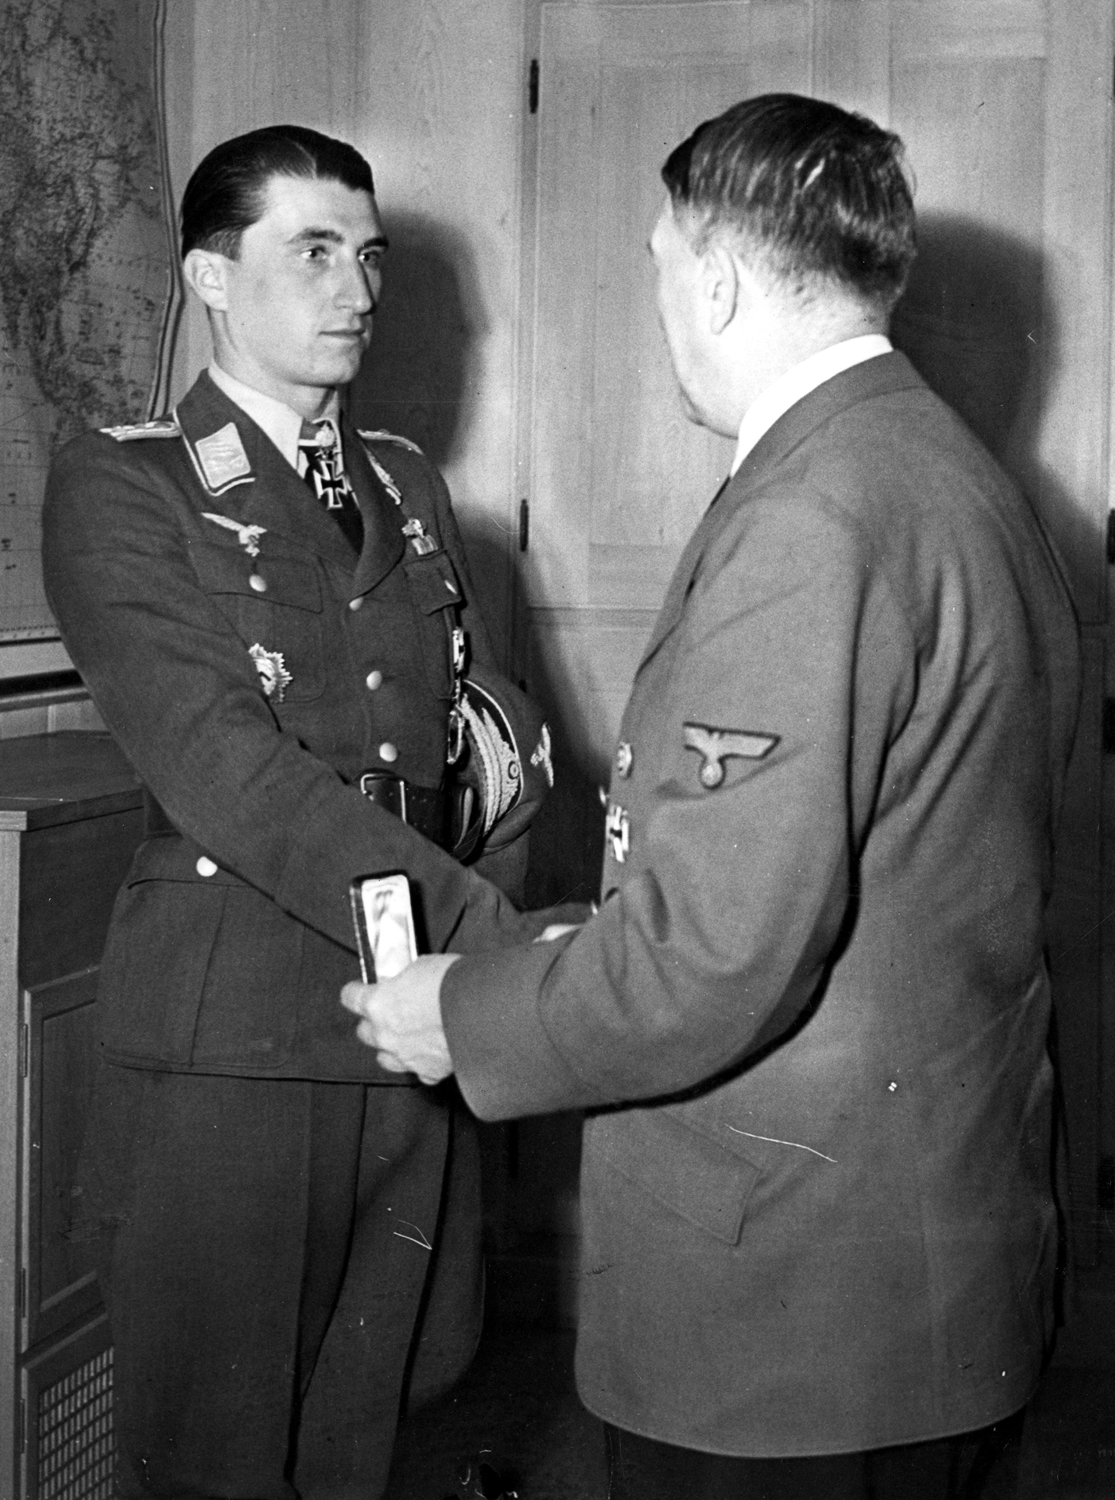 Adolf Hitler awards the night's Cross with Golden Oak Leaves, Swords, and Diamonds to ace pilot Walter Nowotny for his 250th victory